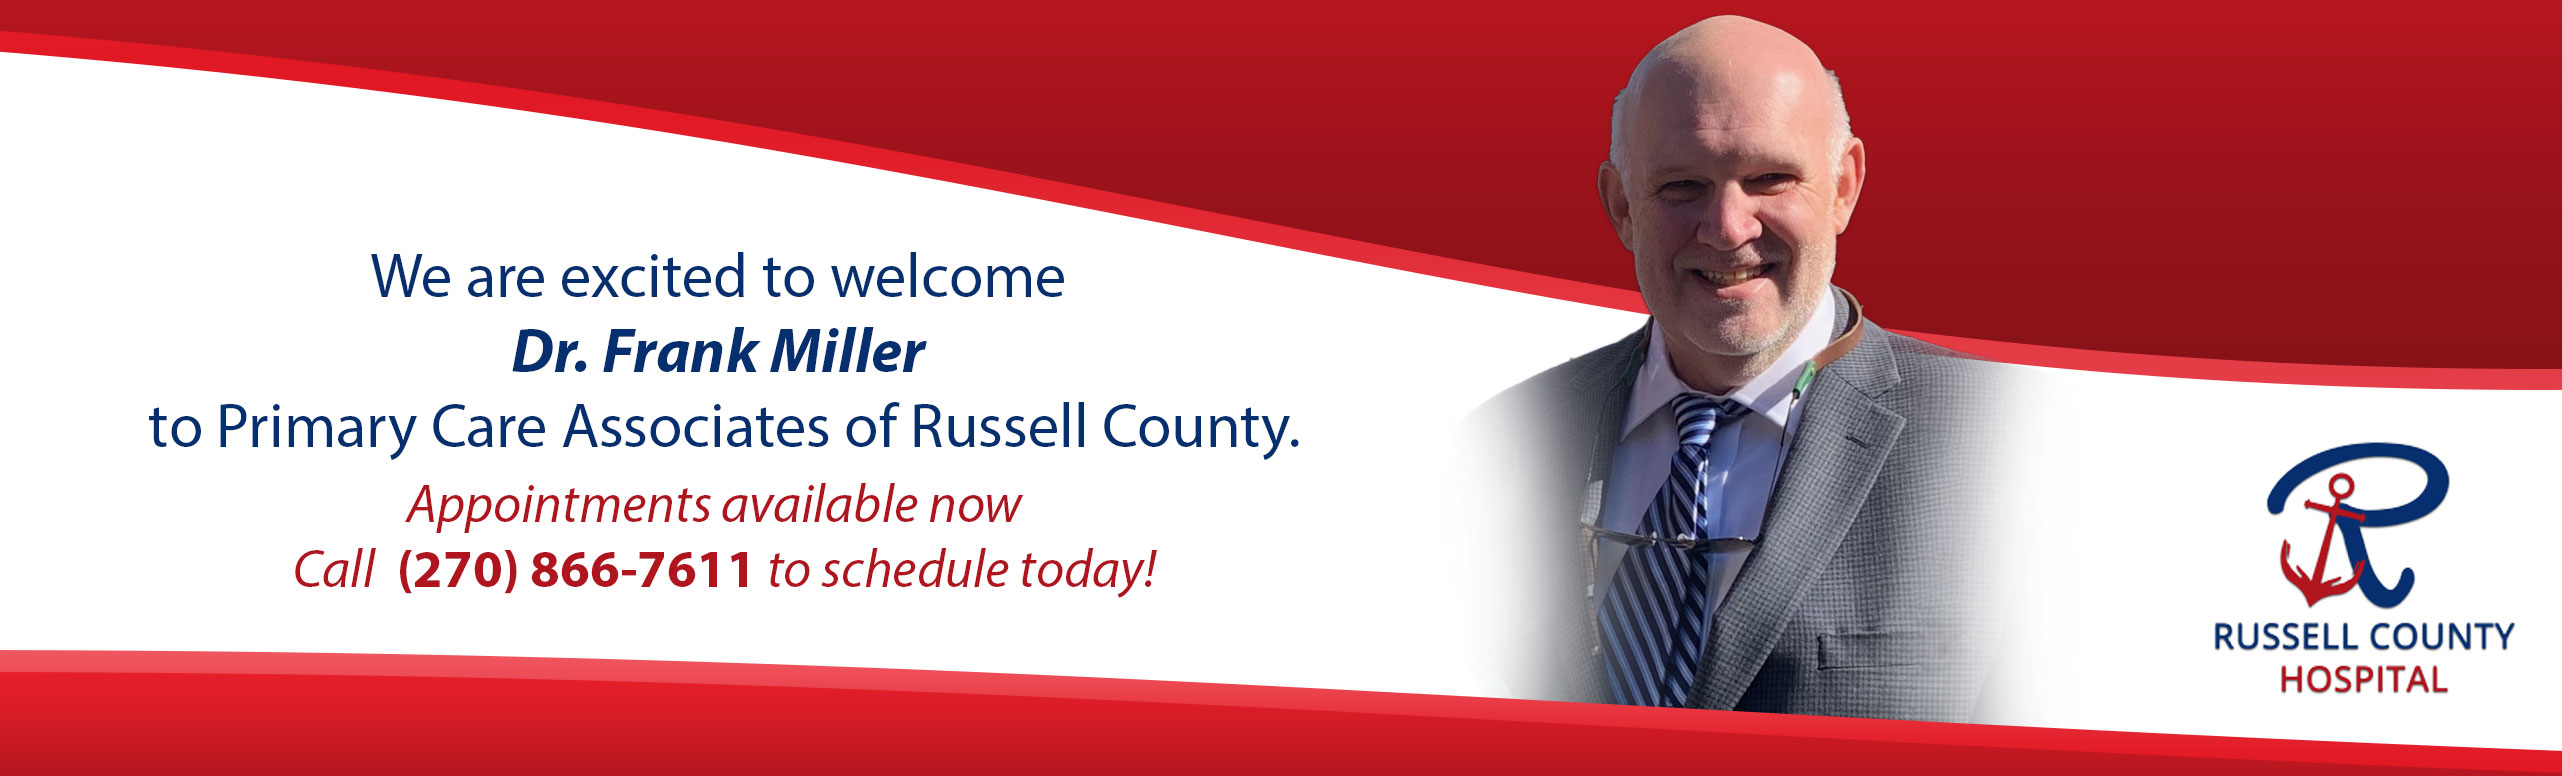 We are excited to welcome Dr. Frank Miller to Primary Care Associates of Russell County.

Appointments available now  
Call  (270) 866-7611 to schedule today!